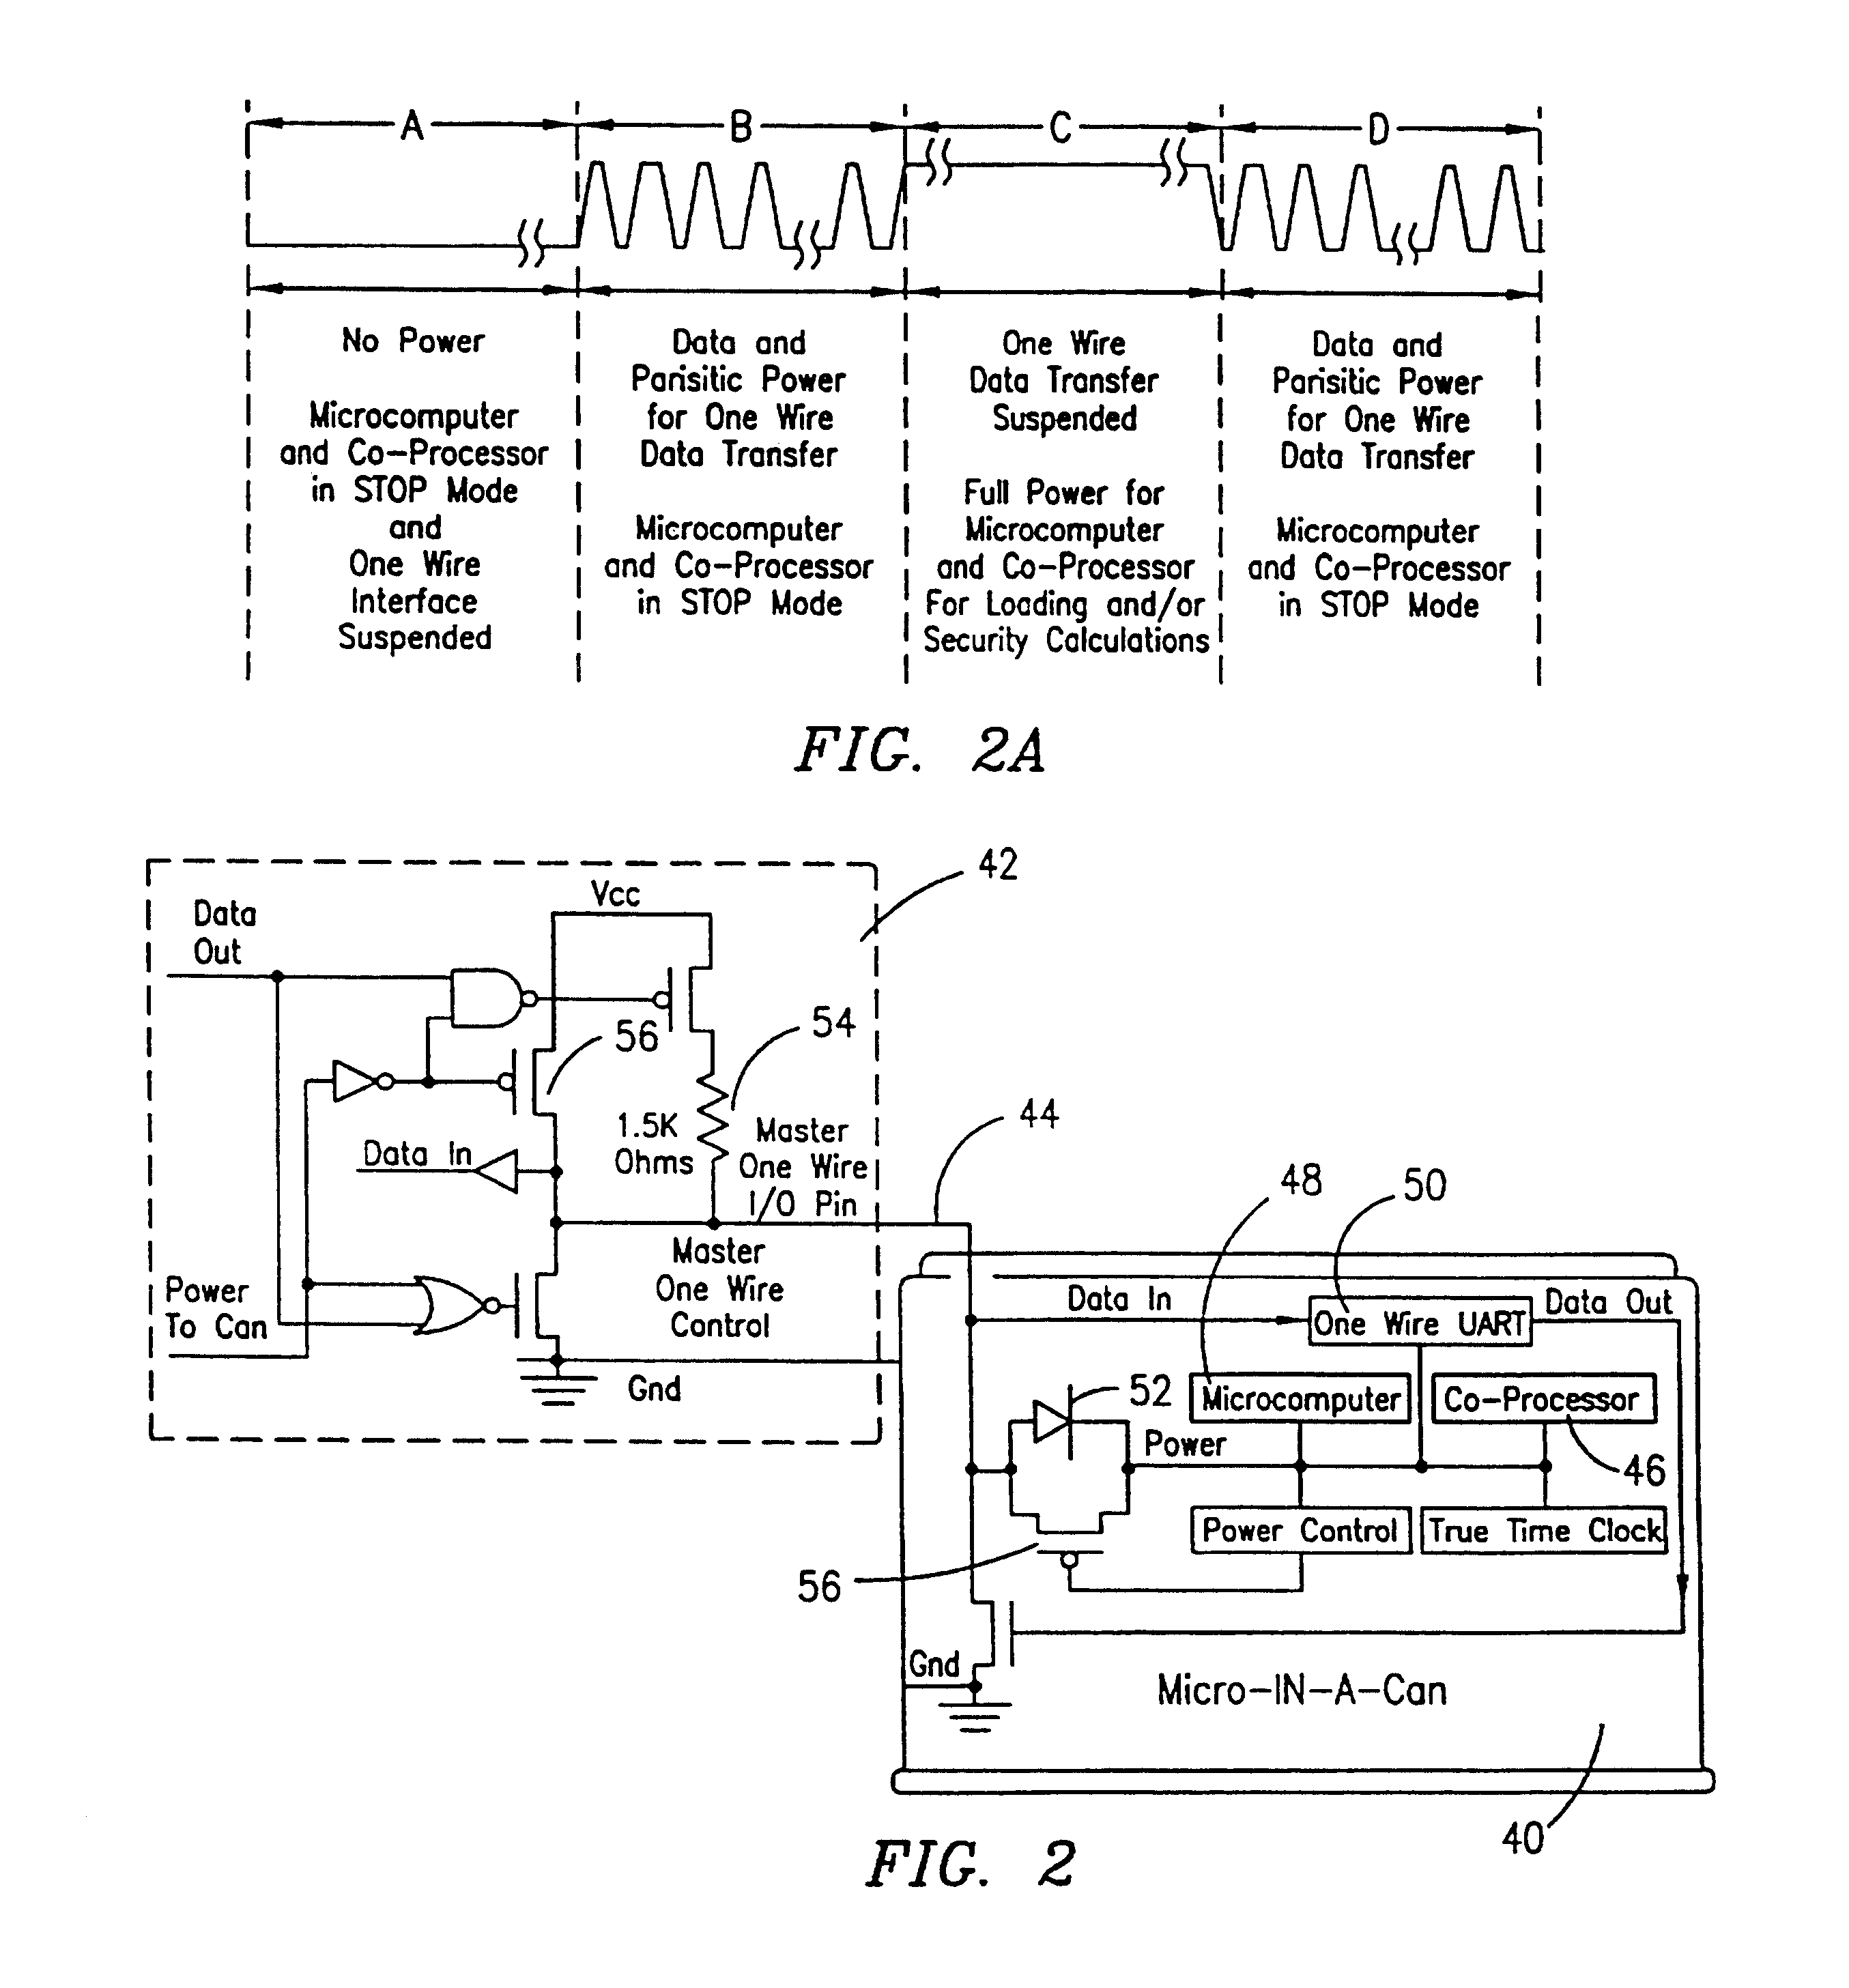 Parasitically powered microprocessor capable of transmitting data over a single data line and ground